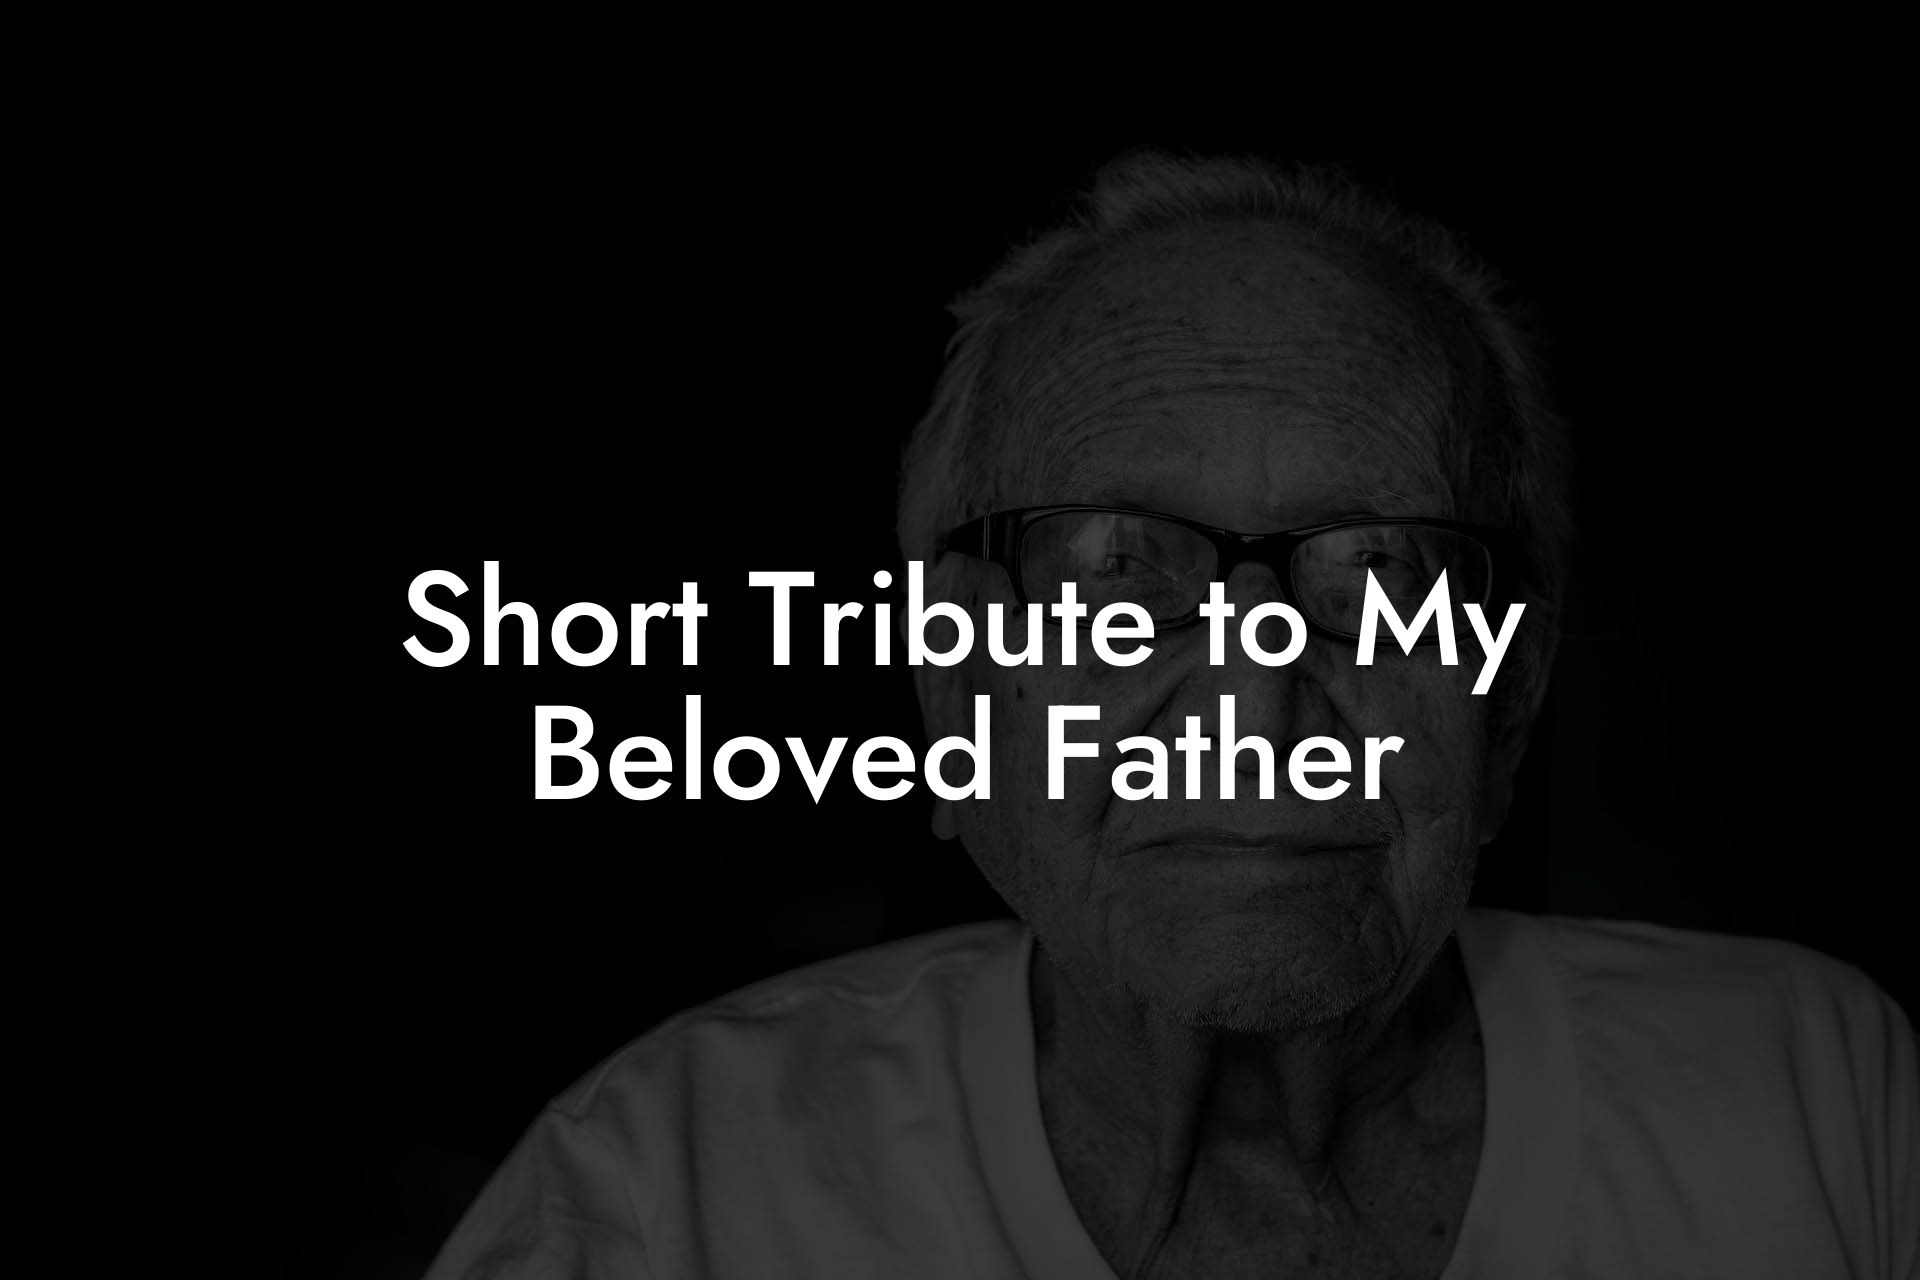 Short Tribute to My Beloved Father